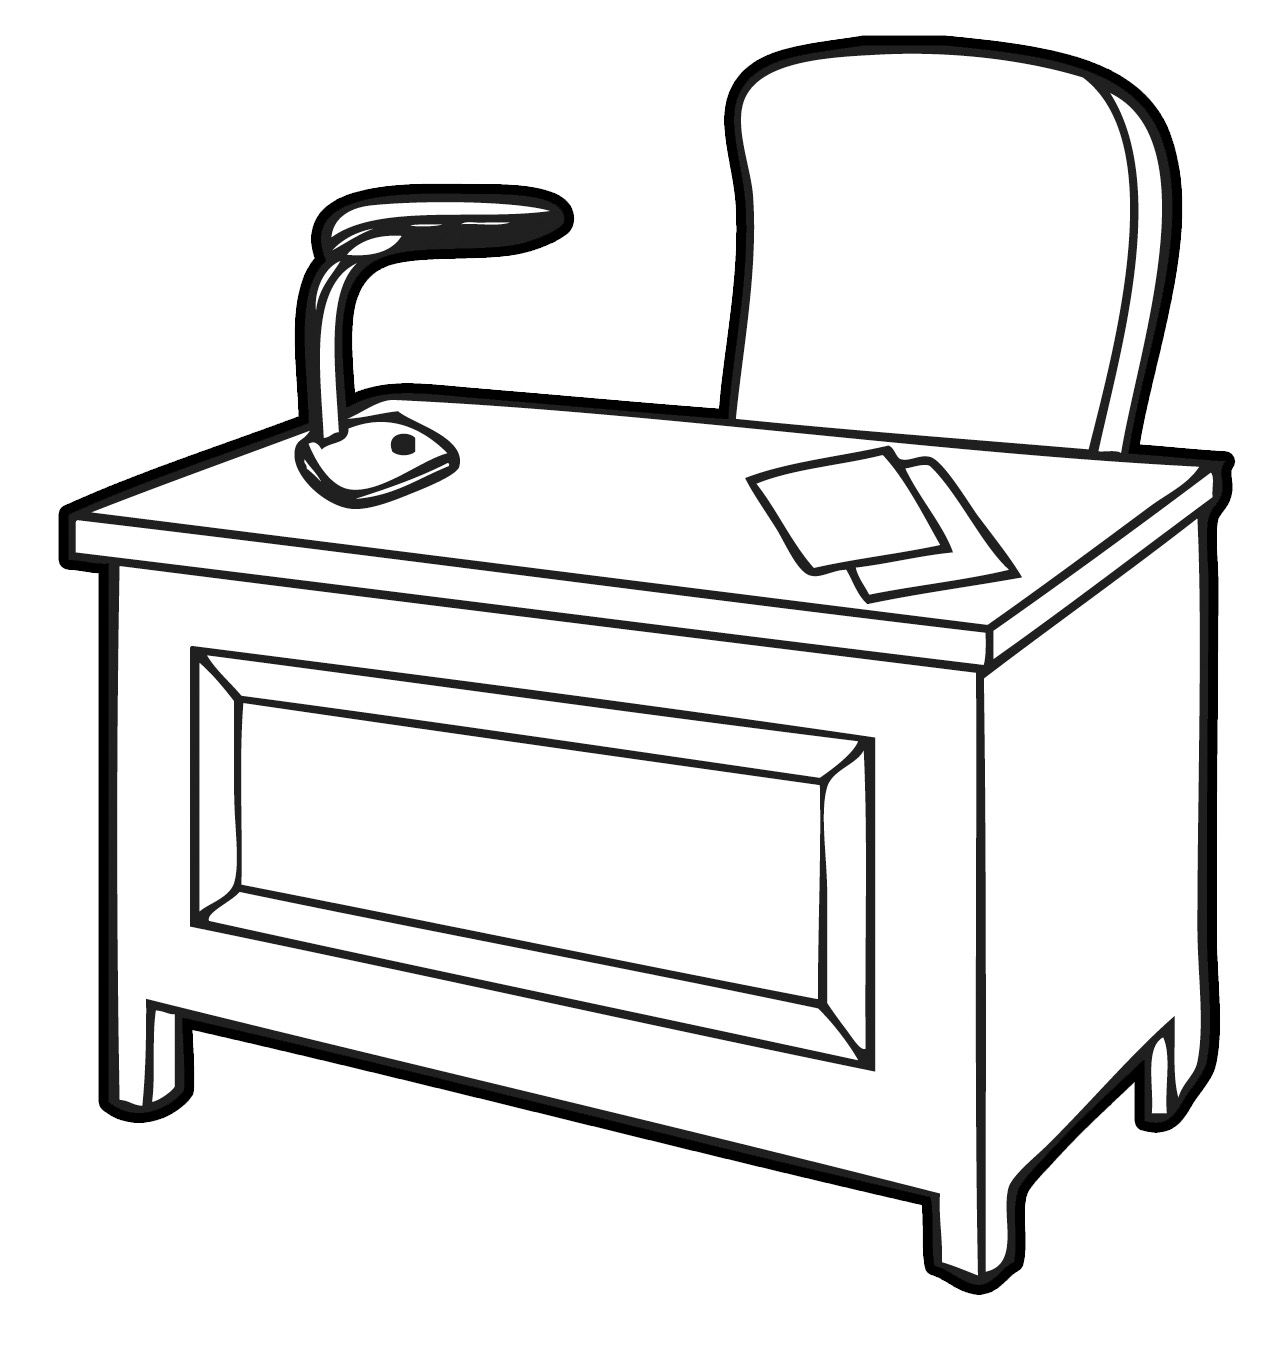 Office phone clipart free clipart images